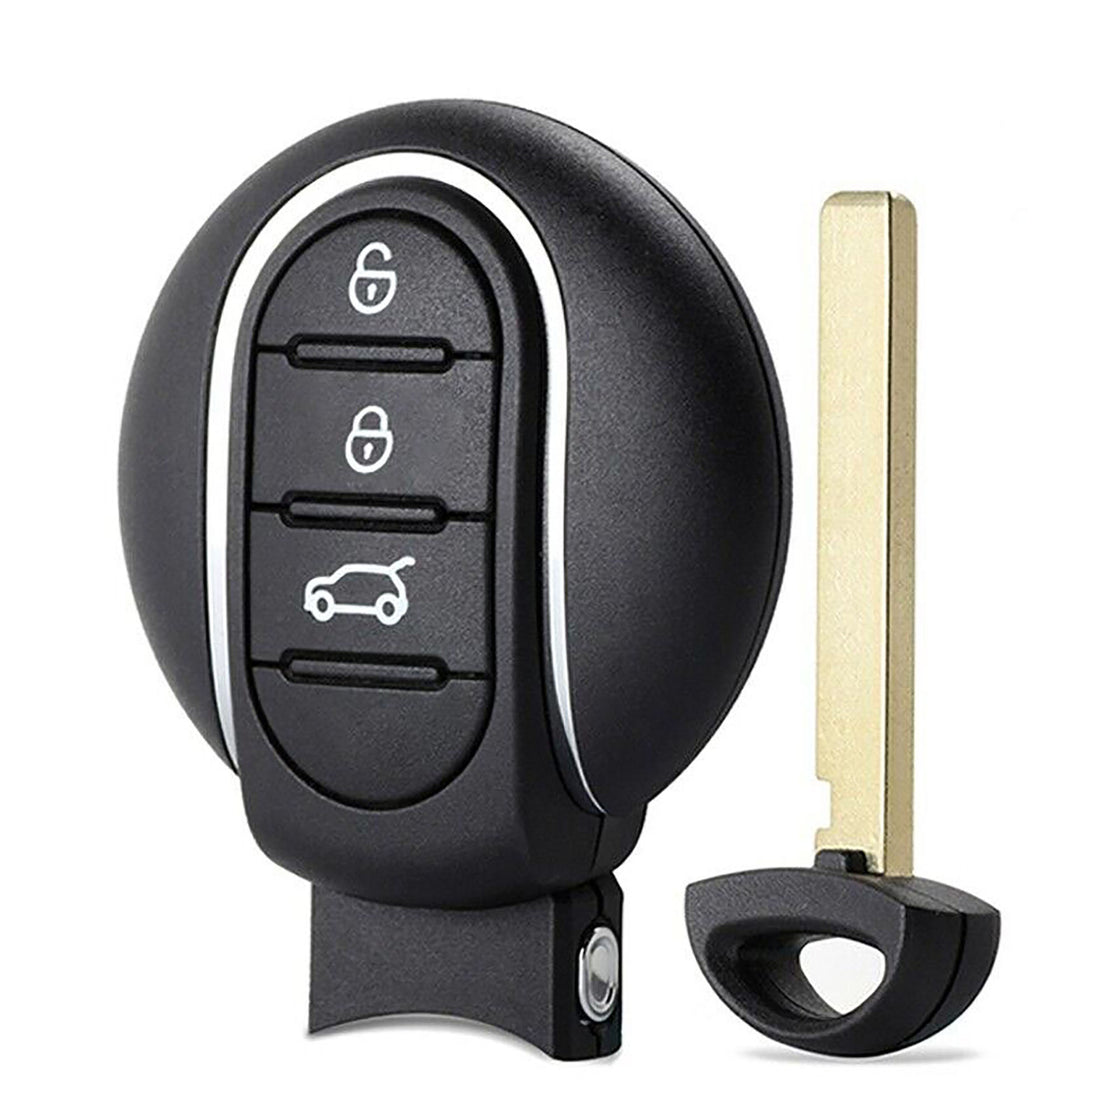 1x New Quality Replacement Proximity Key Fob Remote Compatible with & Fit For 2014-2018 Mini Cooper - MPN NBGIDGNG1-Mini-02